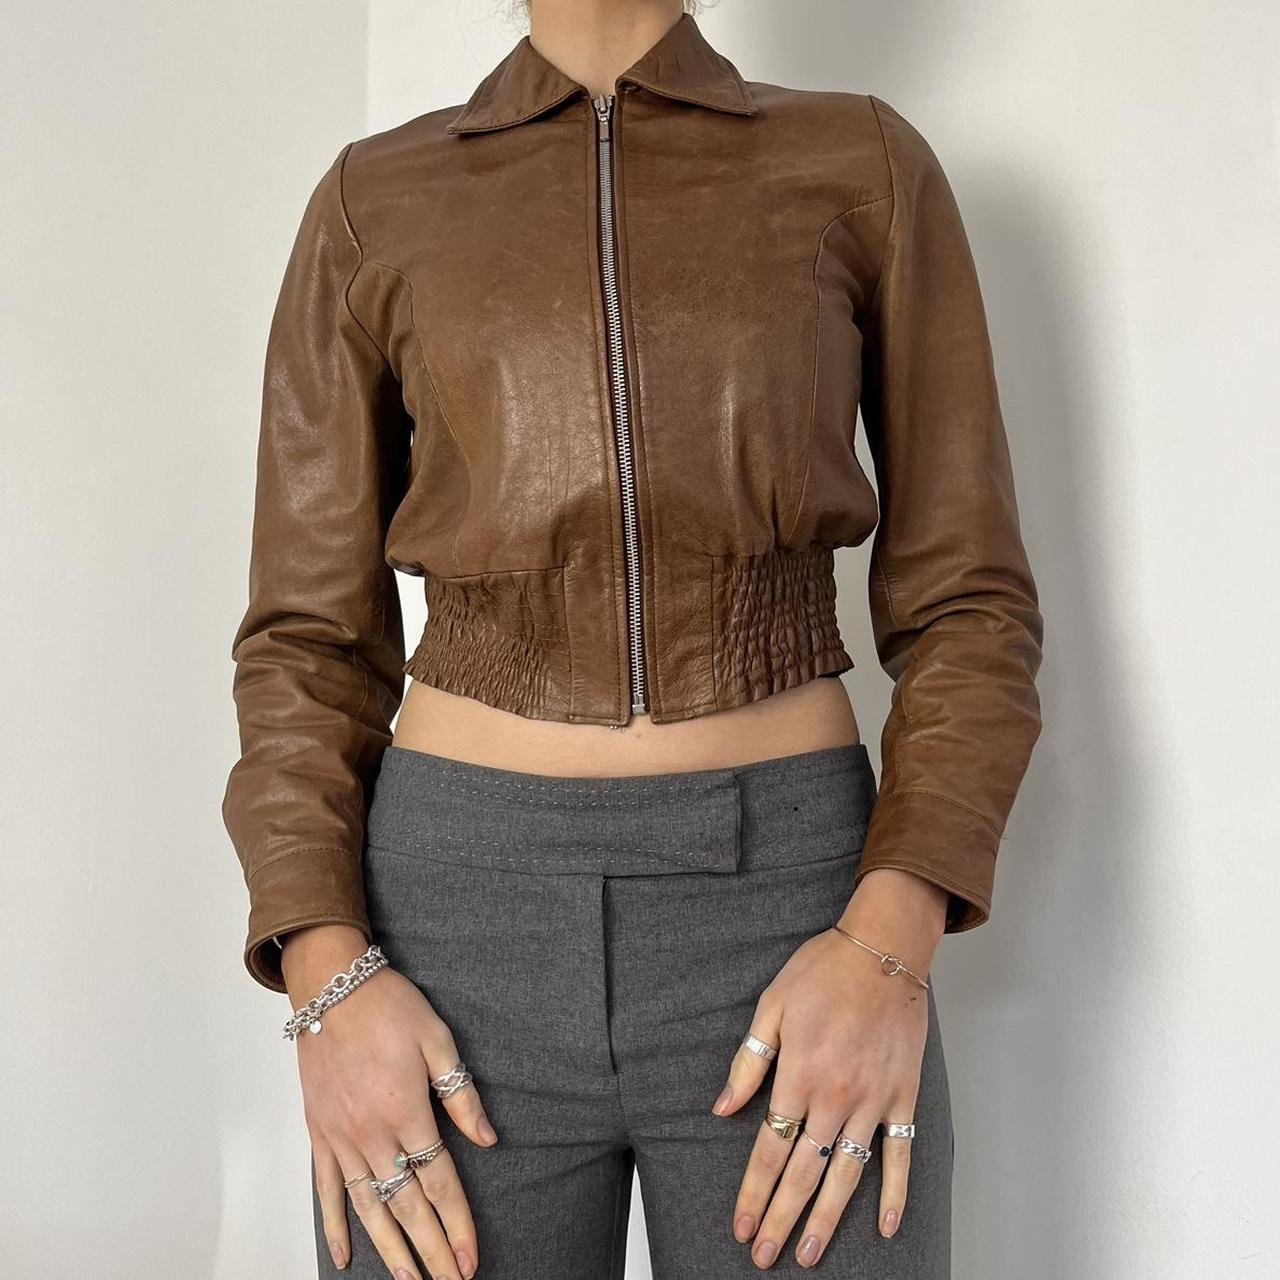 Topshop 90s early 00s label brown zip up leather... - Depop